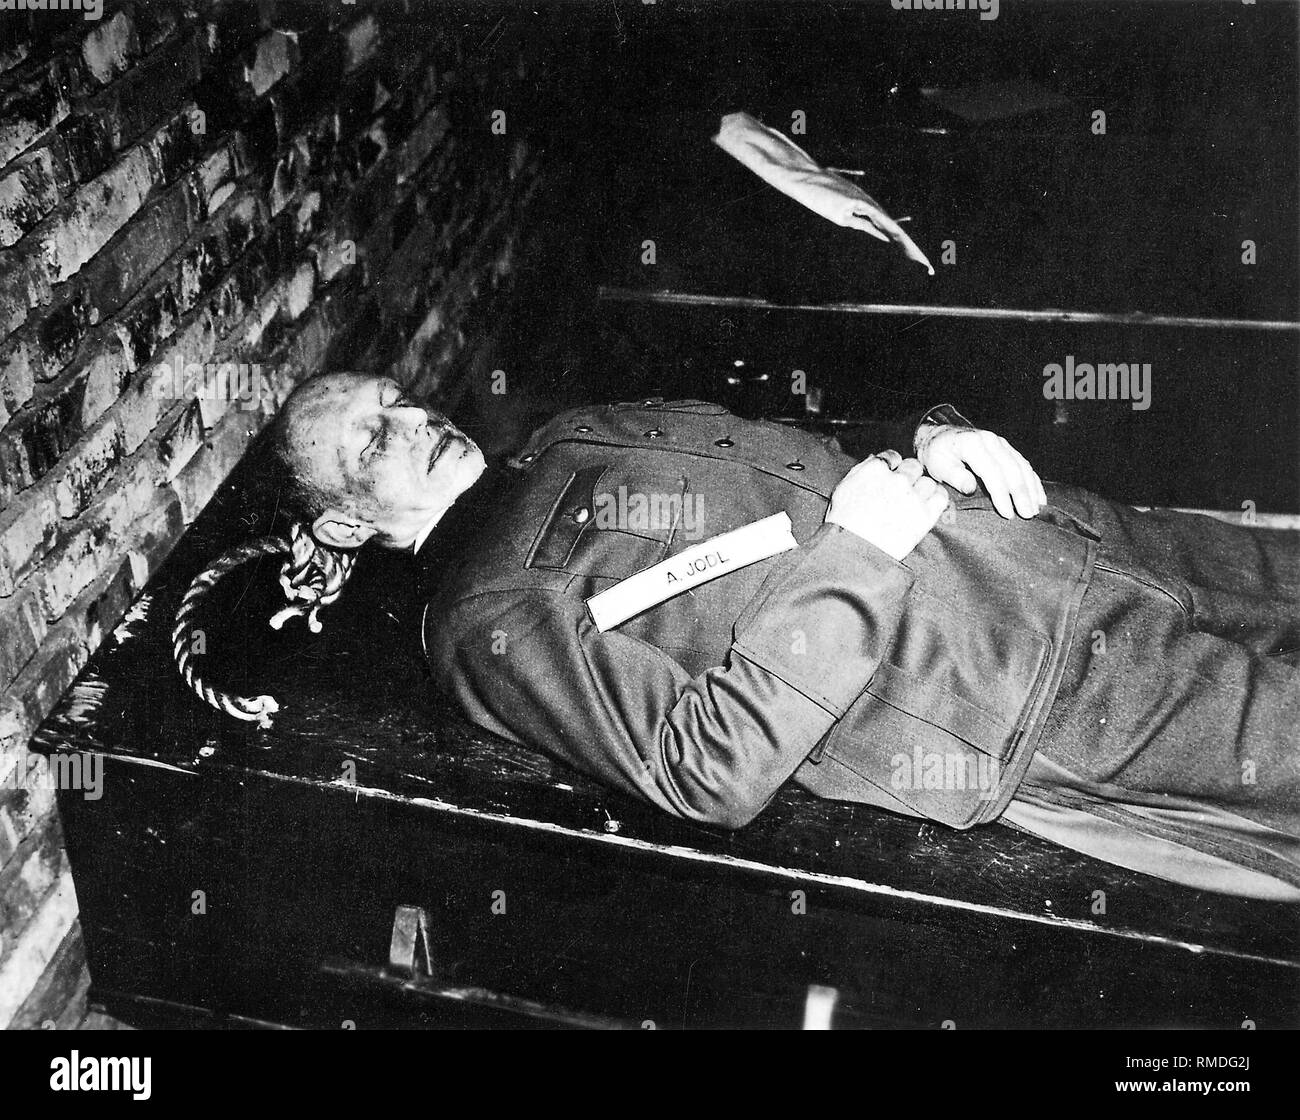 Generaloberst Alfred Jodl after his execution by hanging on October 16, 1946 in Nuremberg (Nuremberg trials). Stock Photo